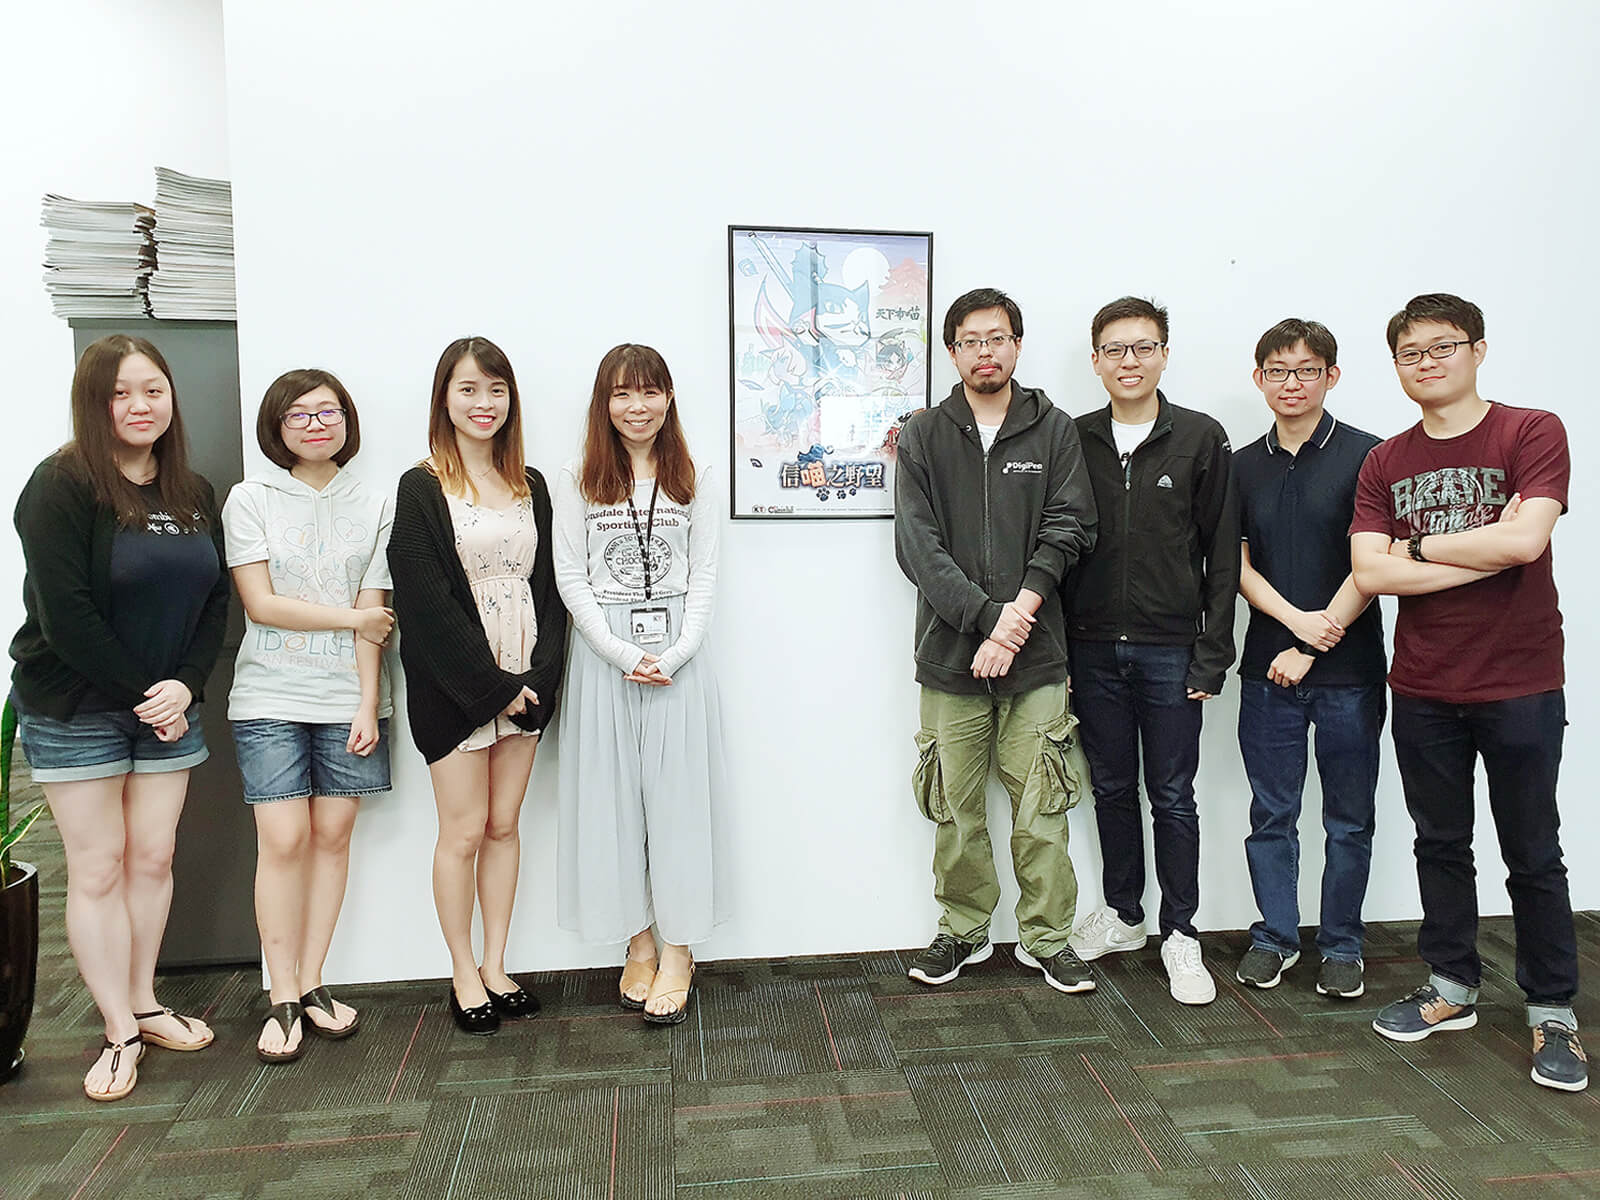 Group photo of the 8 DigiPen (Singapore) alumni who worked on Koei Tecmo's Nyapuri standing in office by a poster of the game.